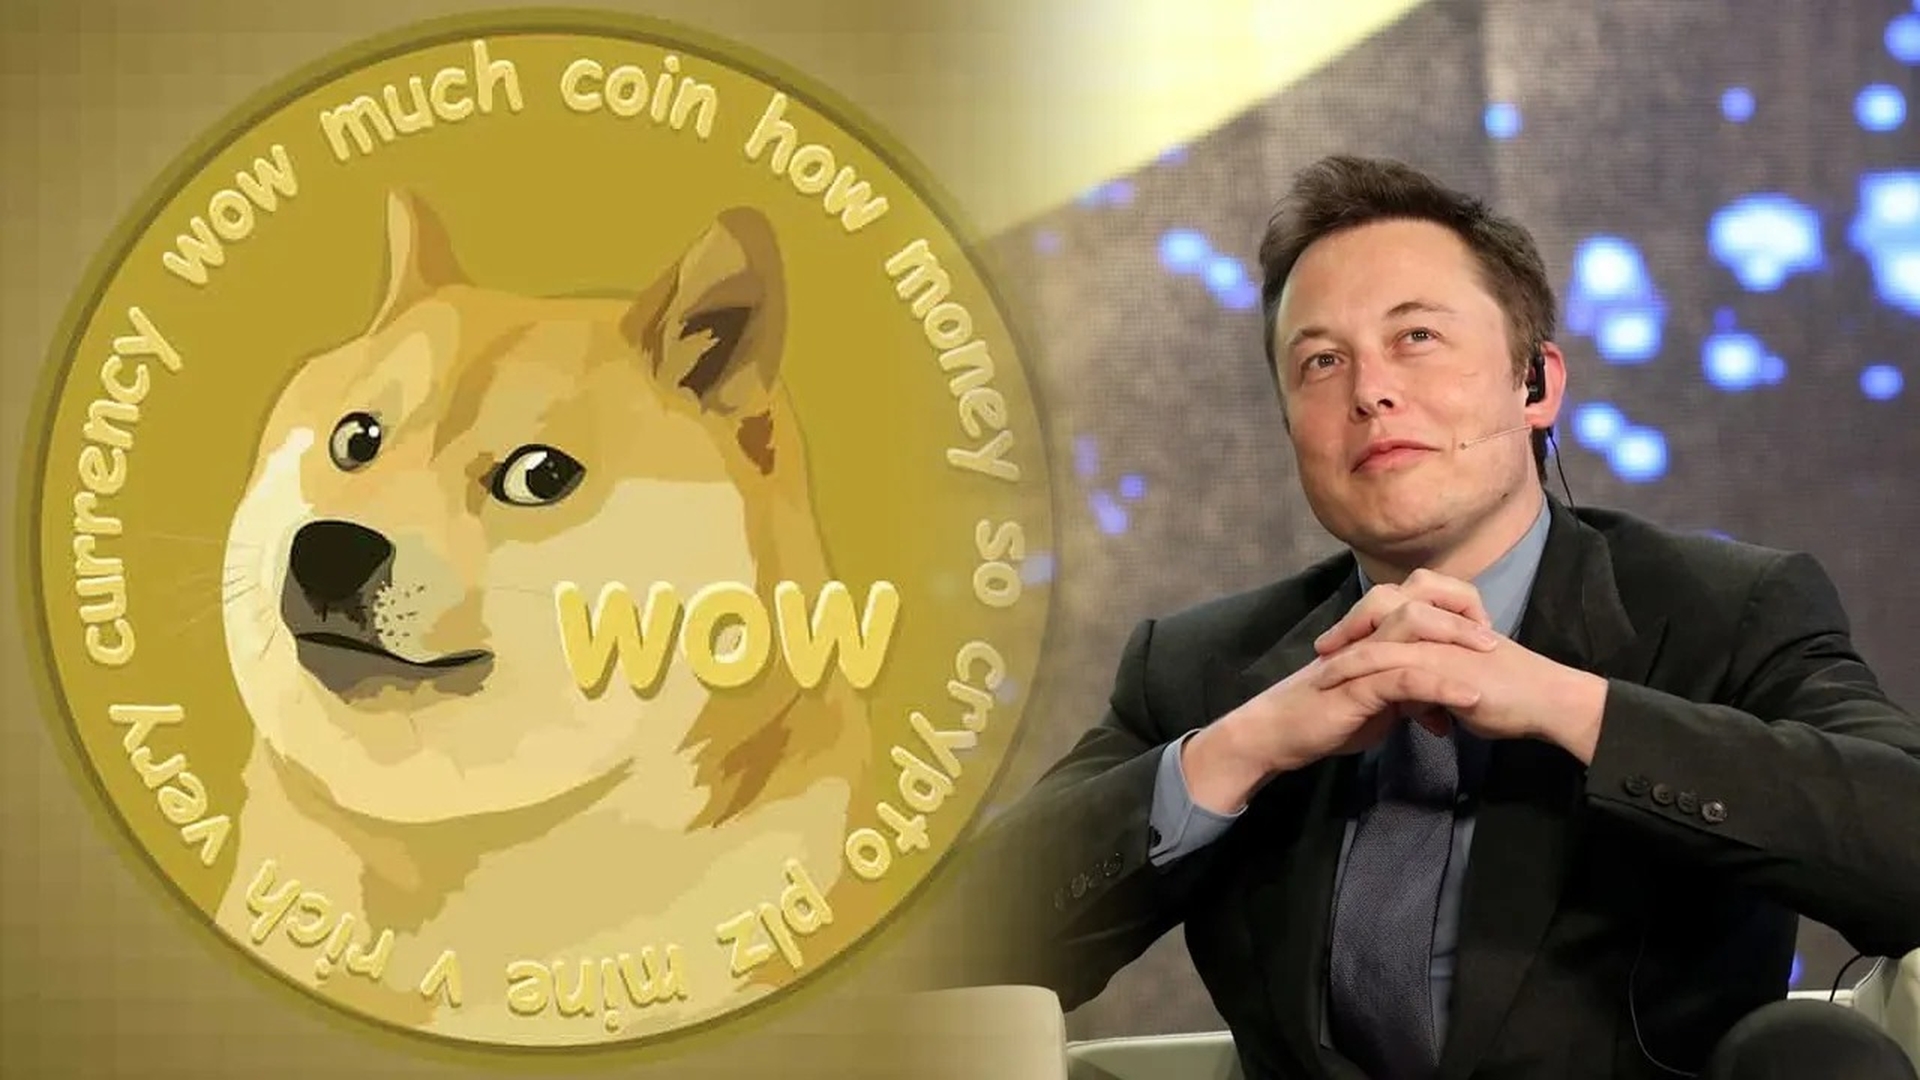 In this article, we are going to go over a tweet from one of Dogecoin founders, which claimed that 95% of cryptos are fraudulent and Elon Musk replied.